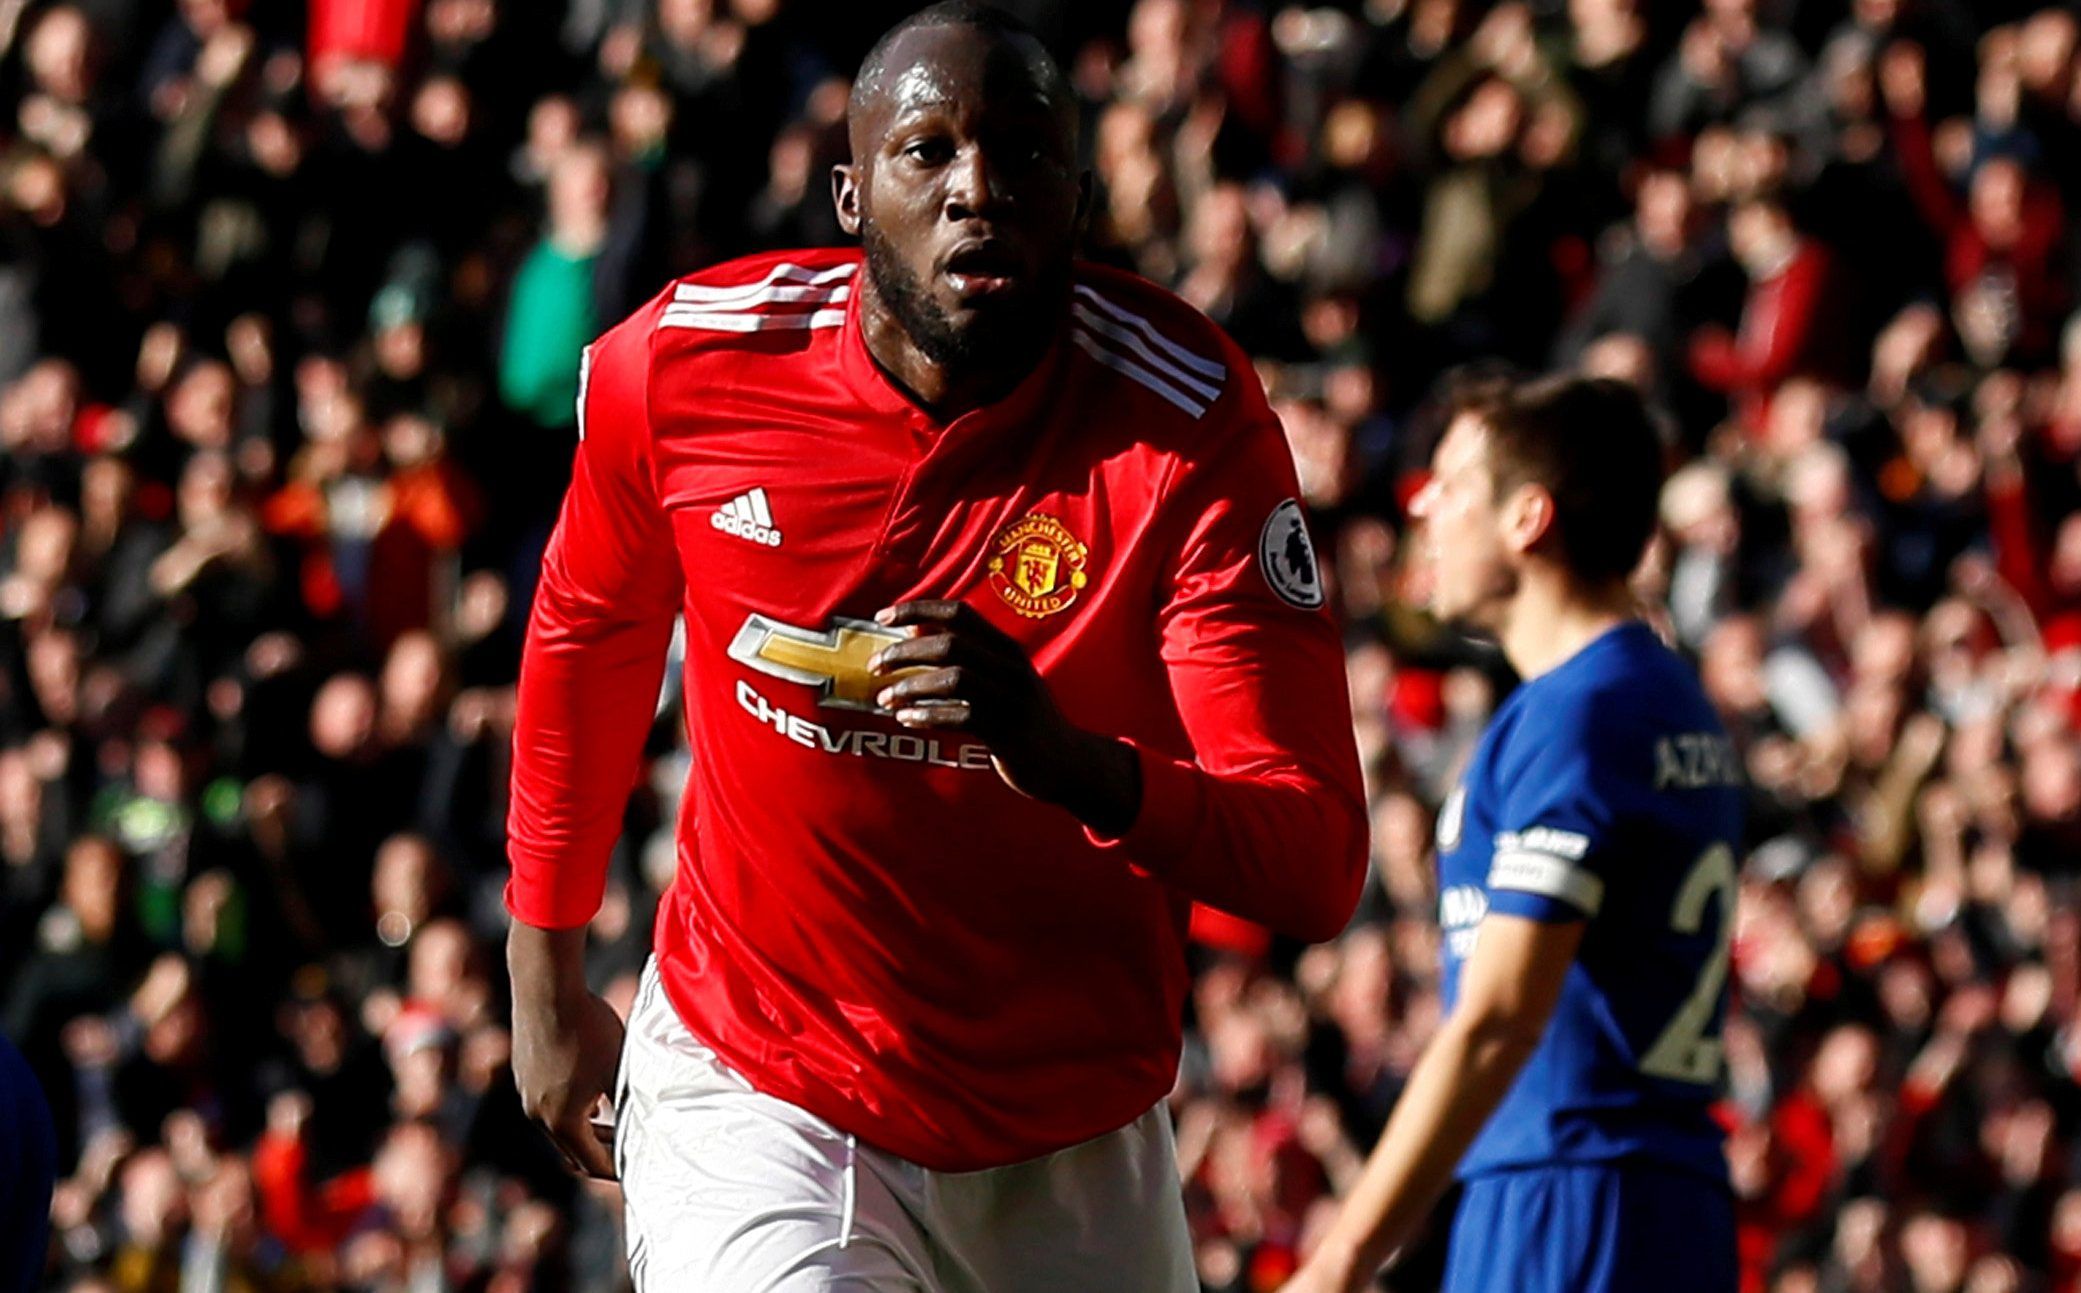 Soccer Football - Premier League - Manchester United vs Chelsea - Old Trafford, Manchester, Britain - February 25, 2018   Manchester United's Romelu Lukaku celebrates scoring their first goal   Action Images via Reuters/Jason Cairnduff    EDITORIAL USE ONLY. No use with unauthorized audio, video, data, fixture lists, club/league logos or 